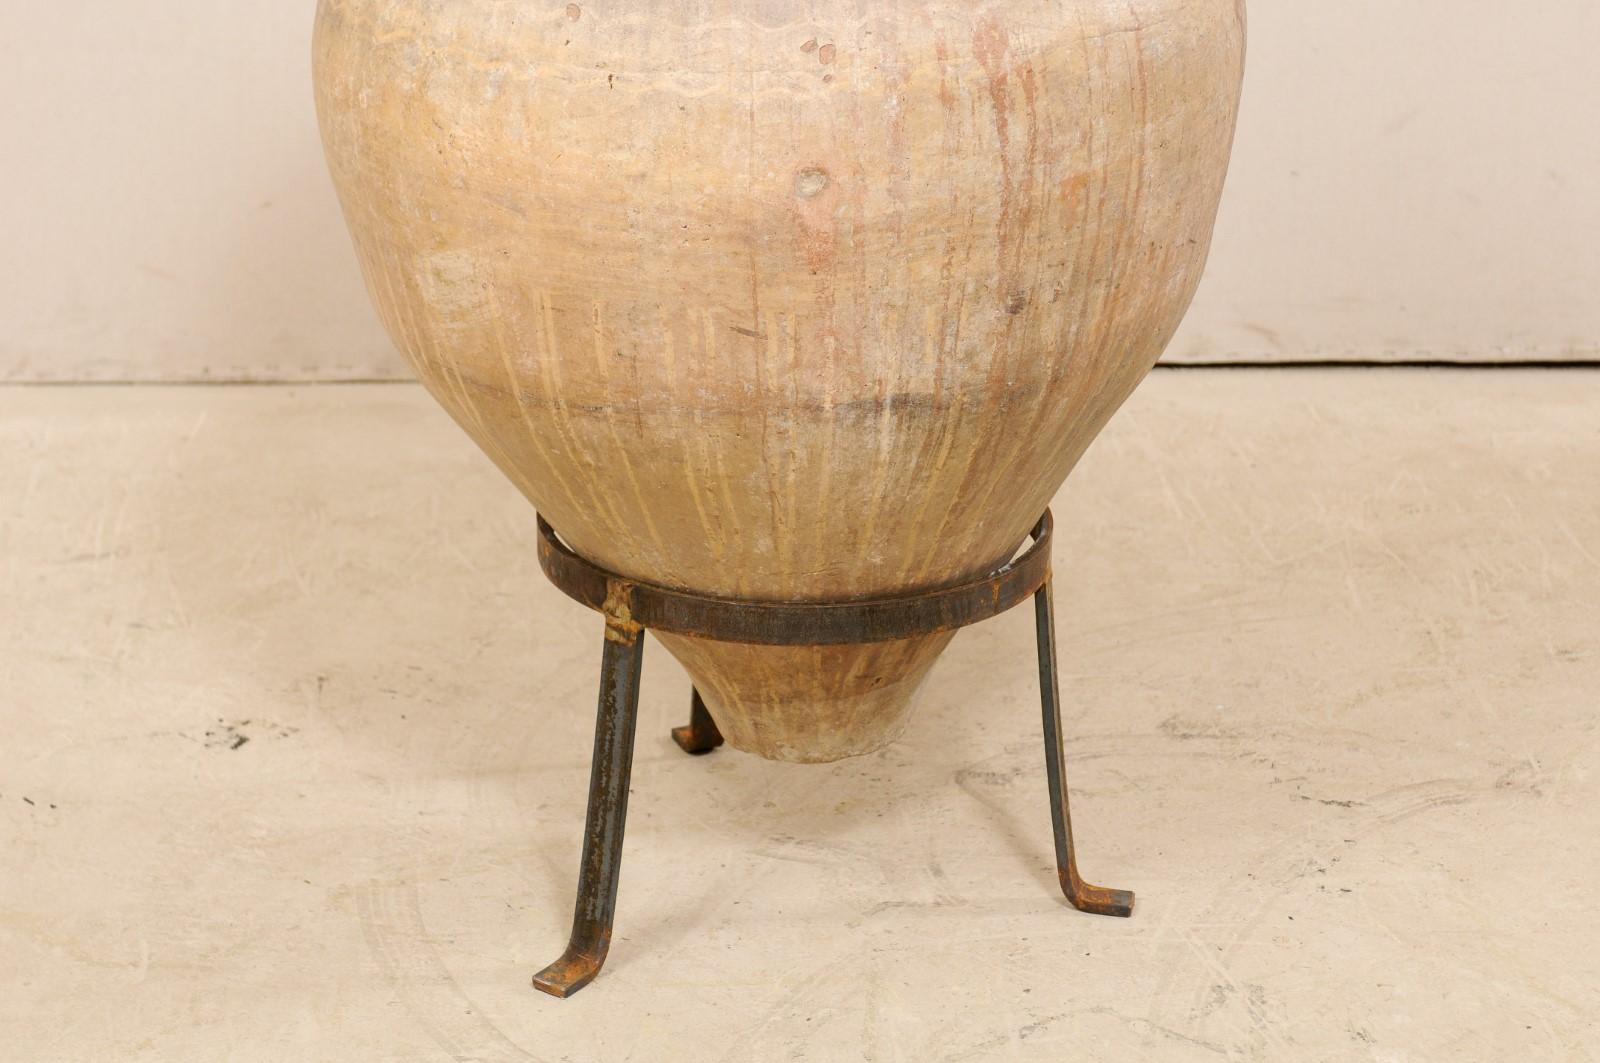 Spanish Large-Sized Olive Jar on Stand from 19th Century on Custom Stand 5